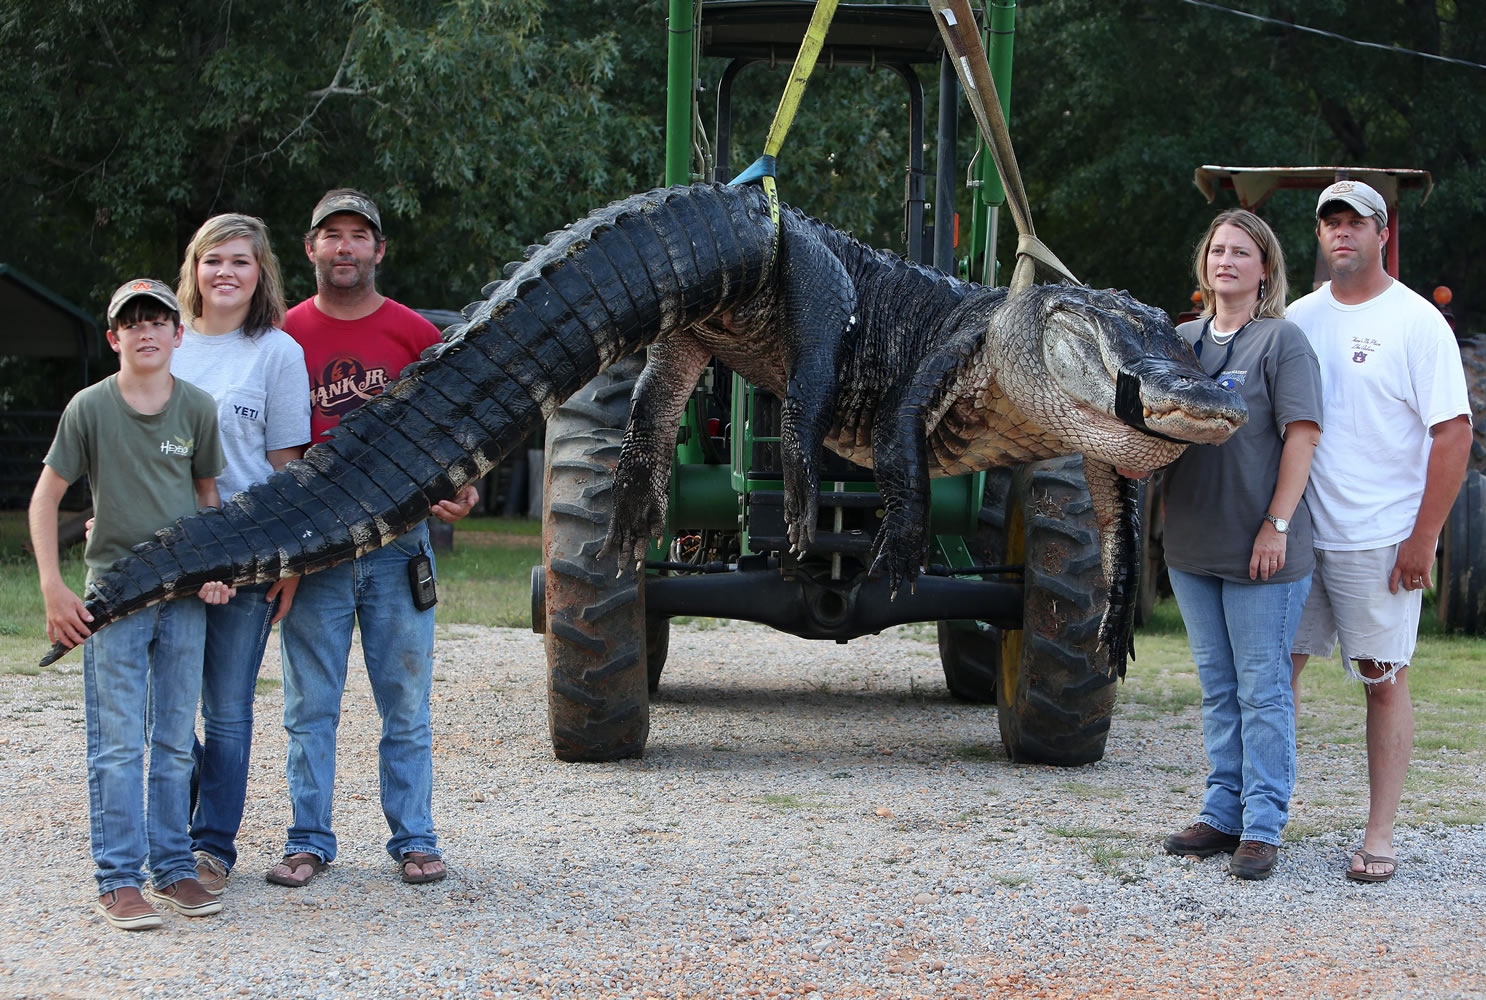 A monster alligator weighing 1,011.5  pounds and measuring 15 feet long was killed Saturday in the Alabama River near Camden, Ala., by Mandy Stokes and her husband, John Stokes, at right, and her brother-in-law Kevin Jenkins, and his children Savannah Jenkins, 16, and Parker Jenkins, 14, left, all of Thomaston, Ala.